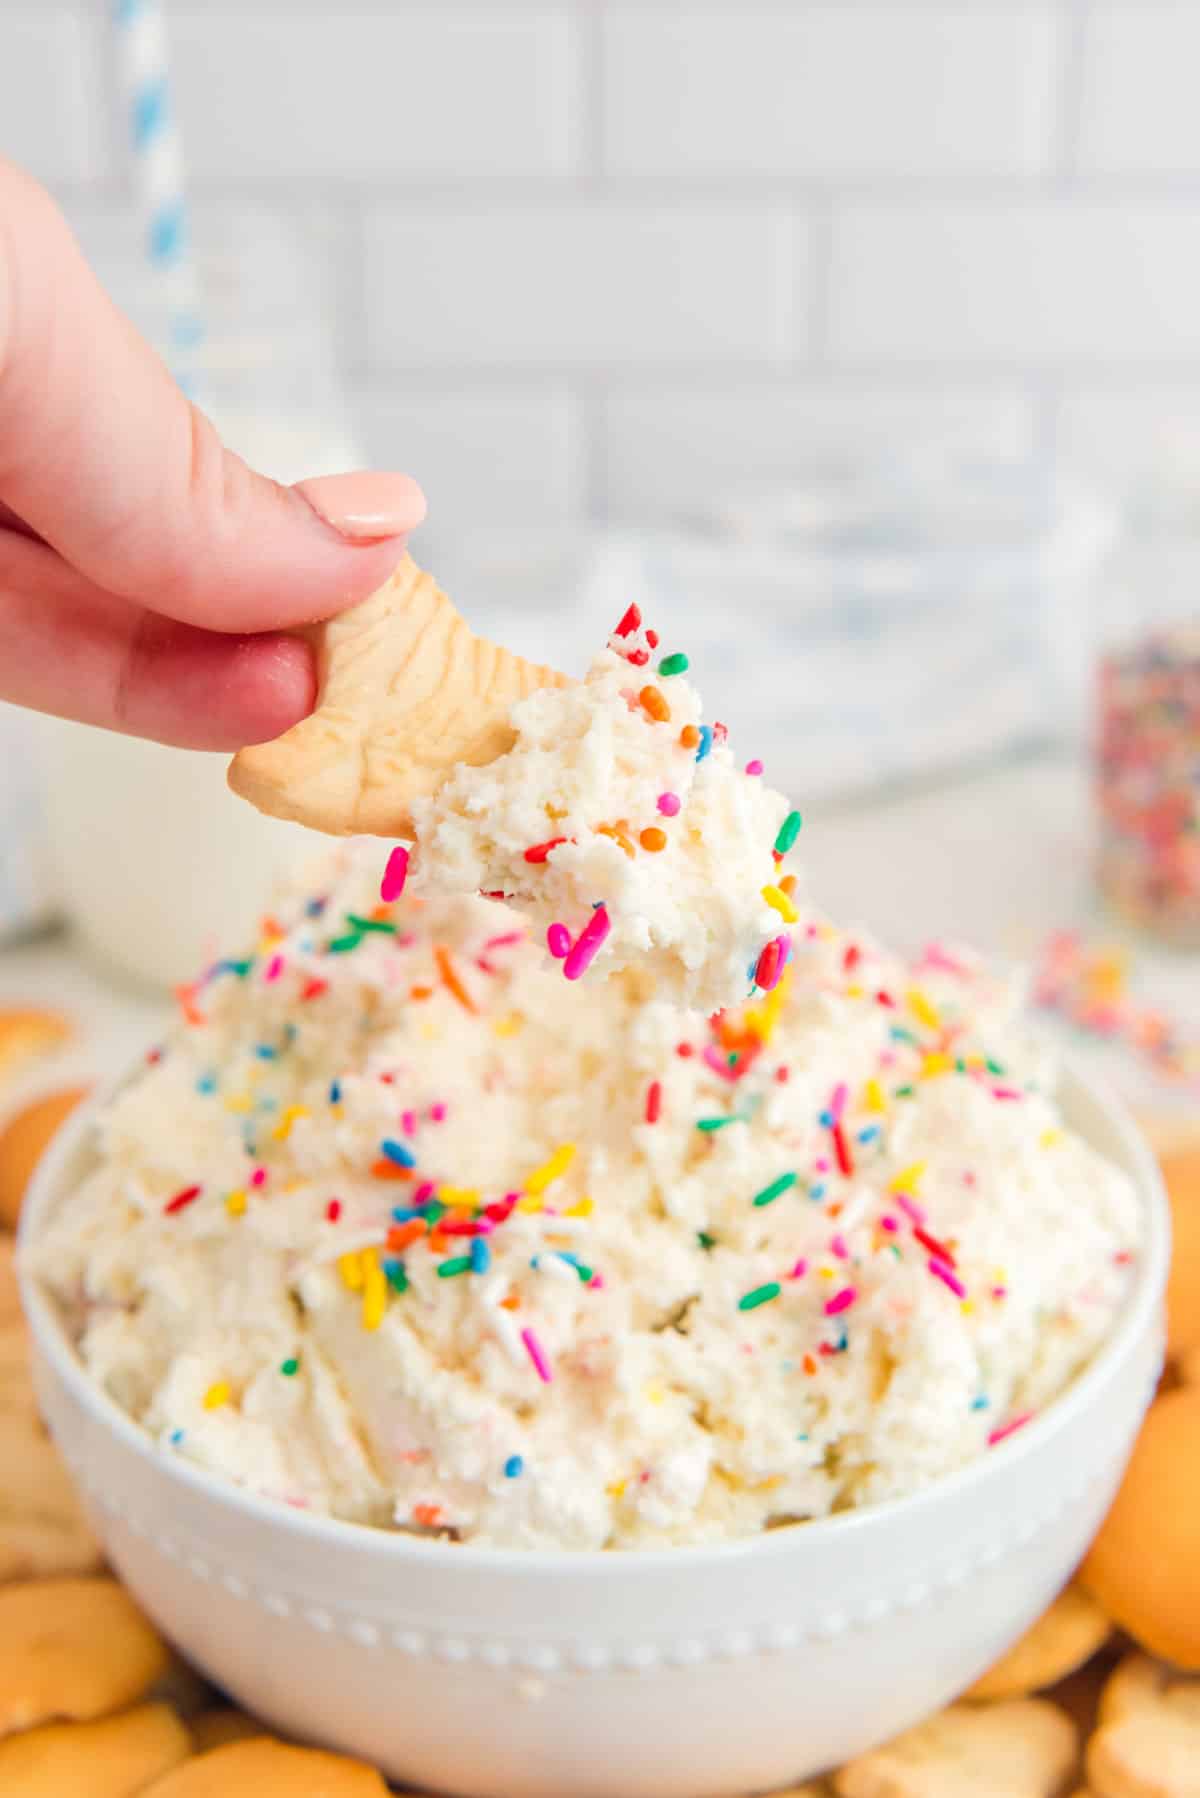 A person dipping a cracker into a bowl of dip with sprinkles.